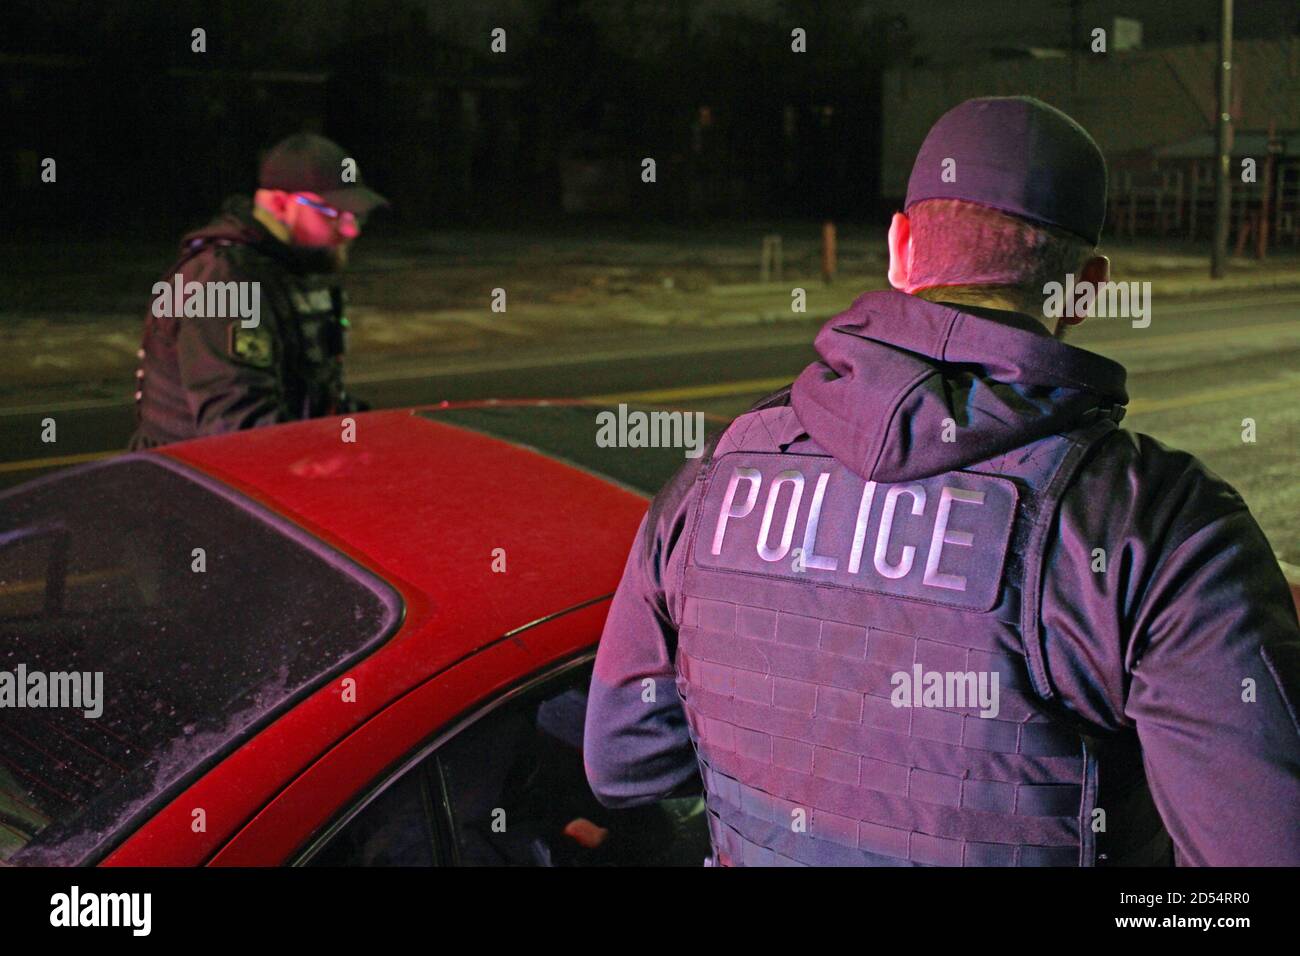 Detroit police officers speak to the driver of a car at night, Detroit, Michigan, USA Stock Photo